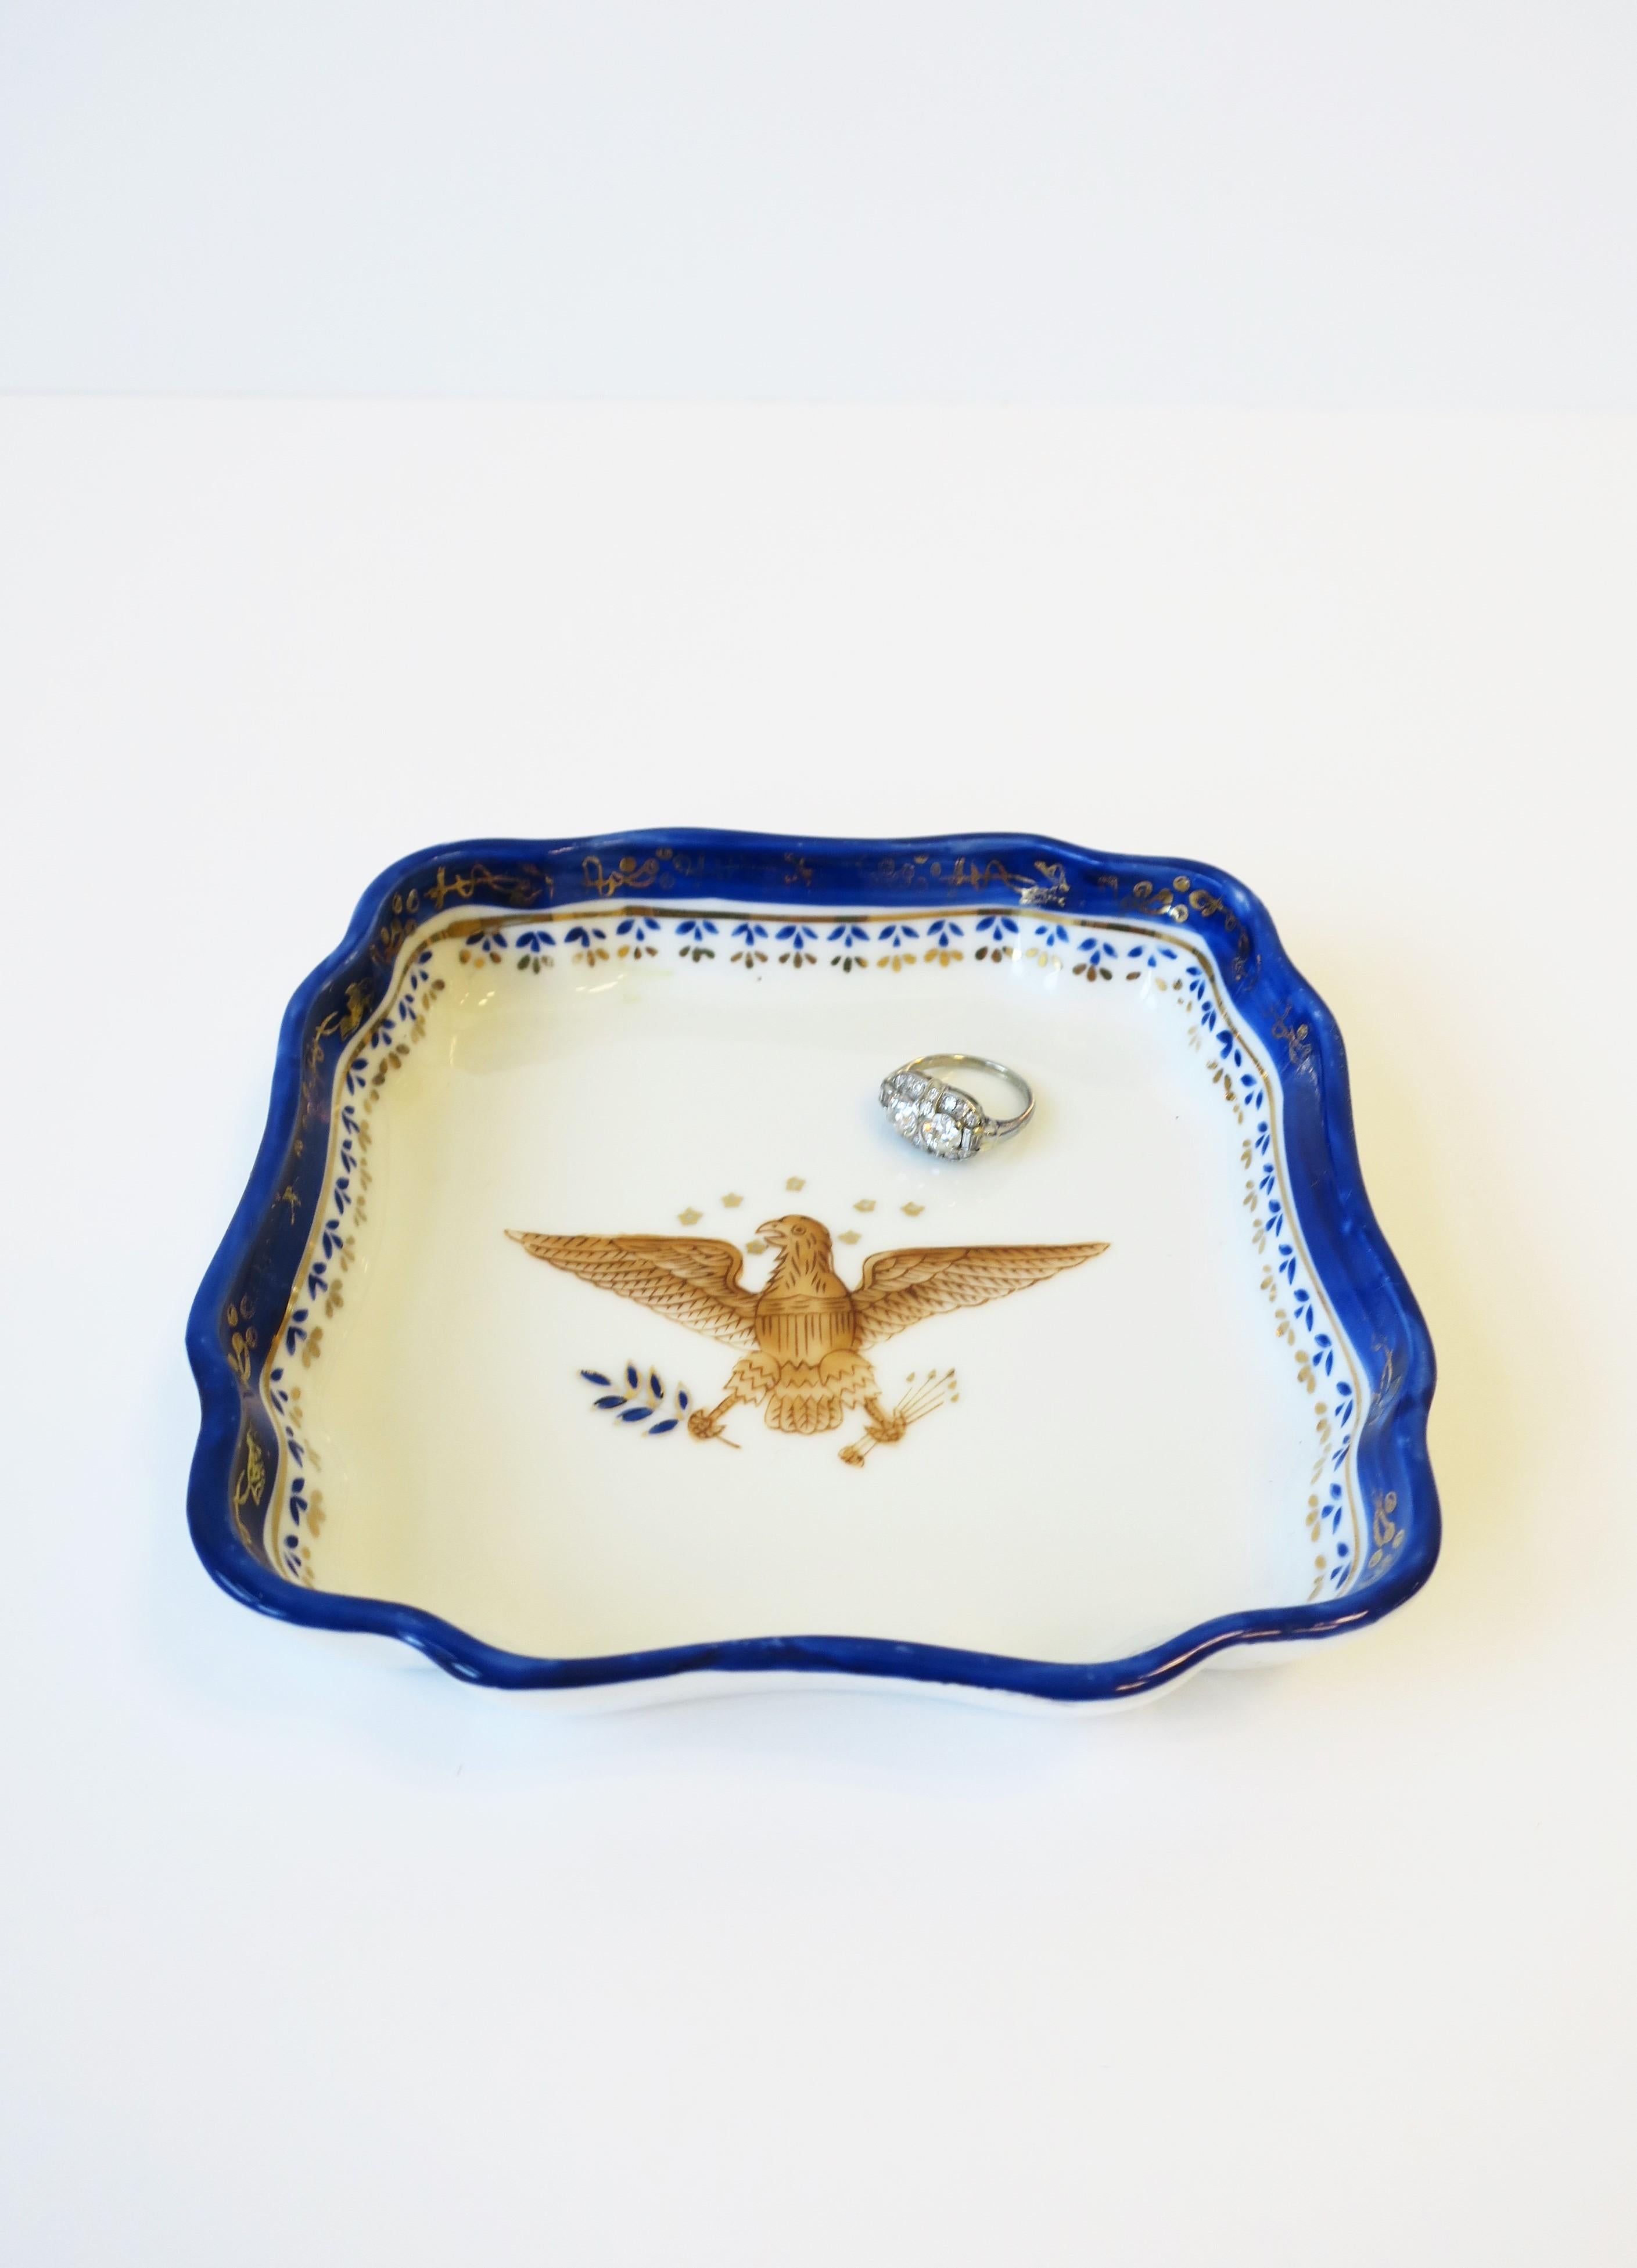 Glazed Federal Design Blue Gold White Porcelain Jewelry or Trinket Dish with Eagle Bird